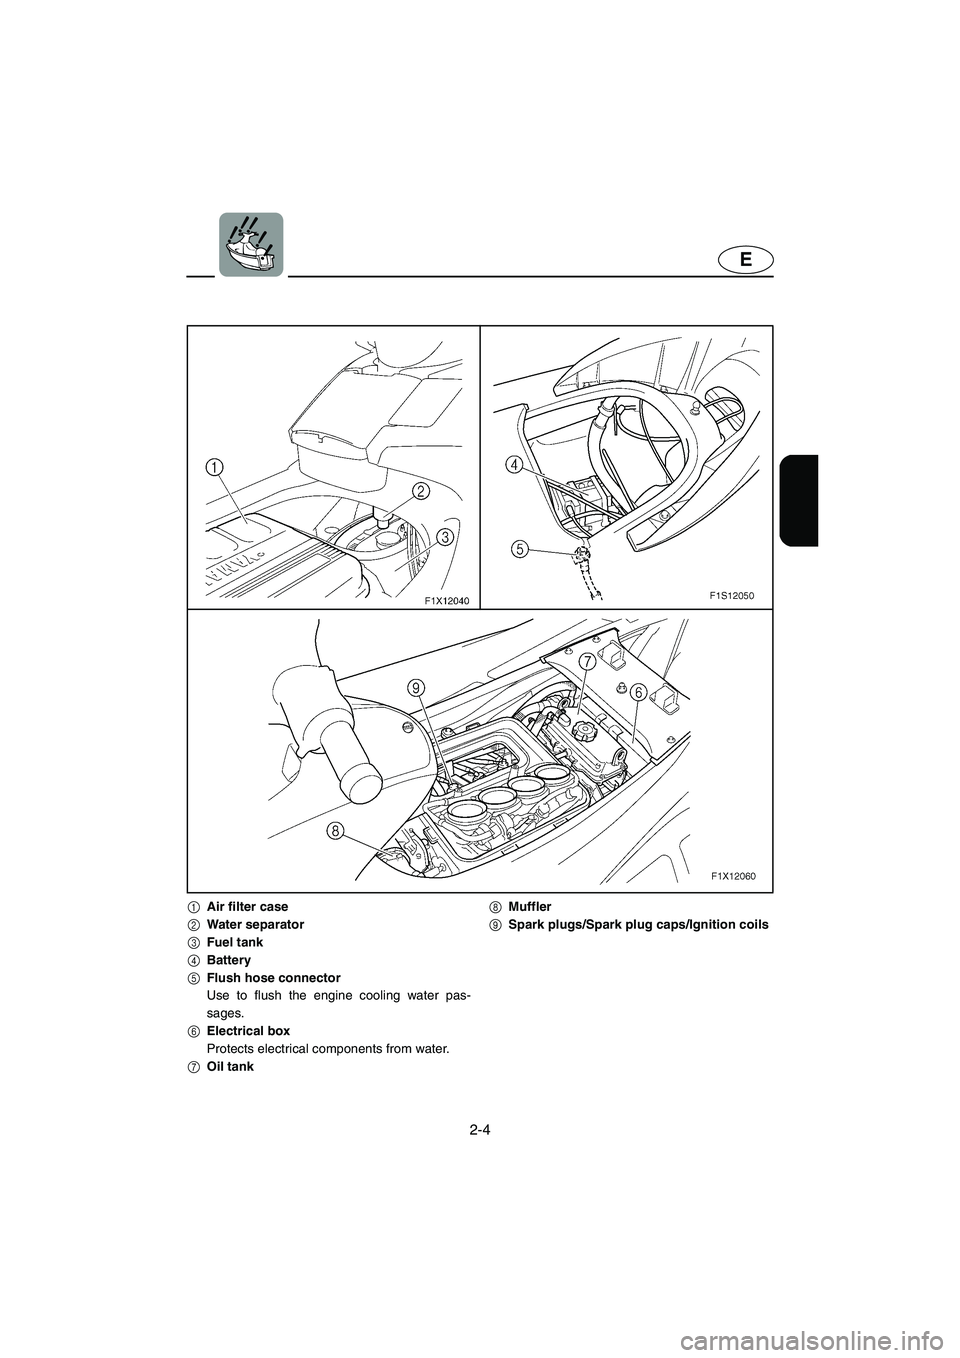 YAMAHA FX HO 2006  Owners Manual 2-4
E
1Air filter case
2Water separator
3Fuel tank
4Battery
5Flush hose connector
Use to flush the engine cooling water pas-
sages.
6Electrical box
Protects electrical components from water.
7Oil tank